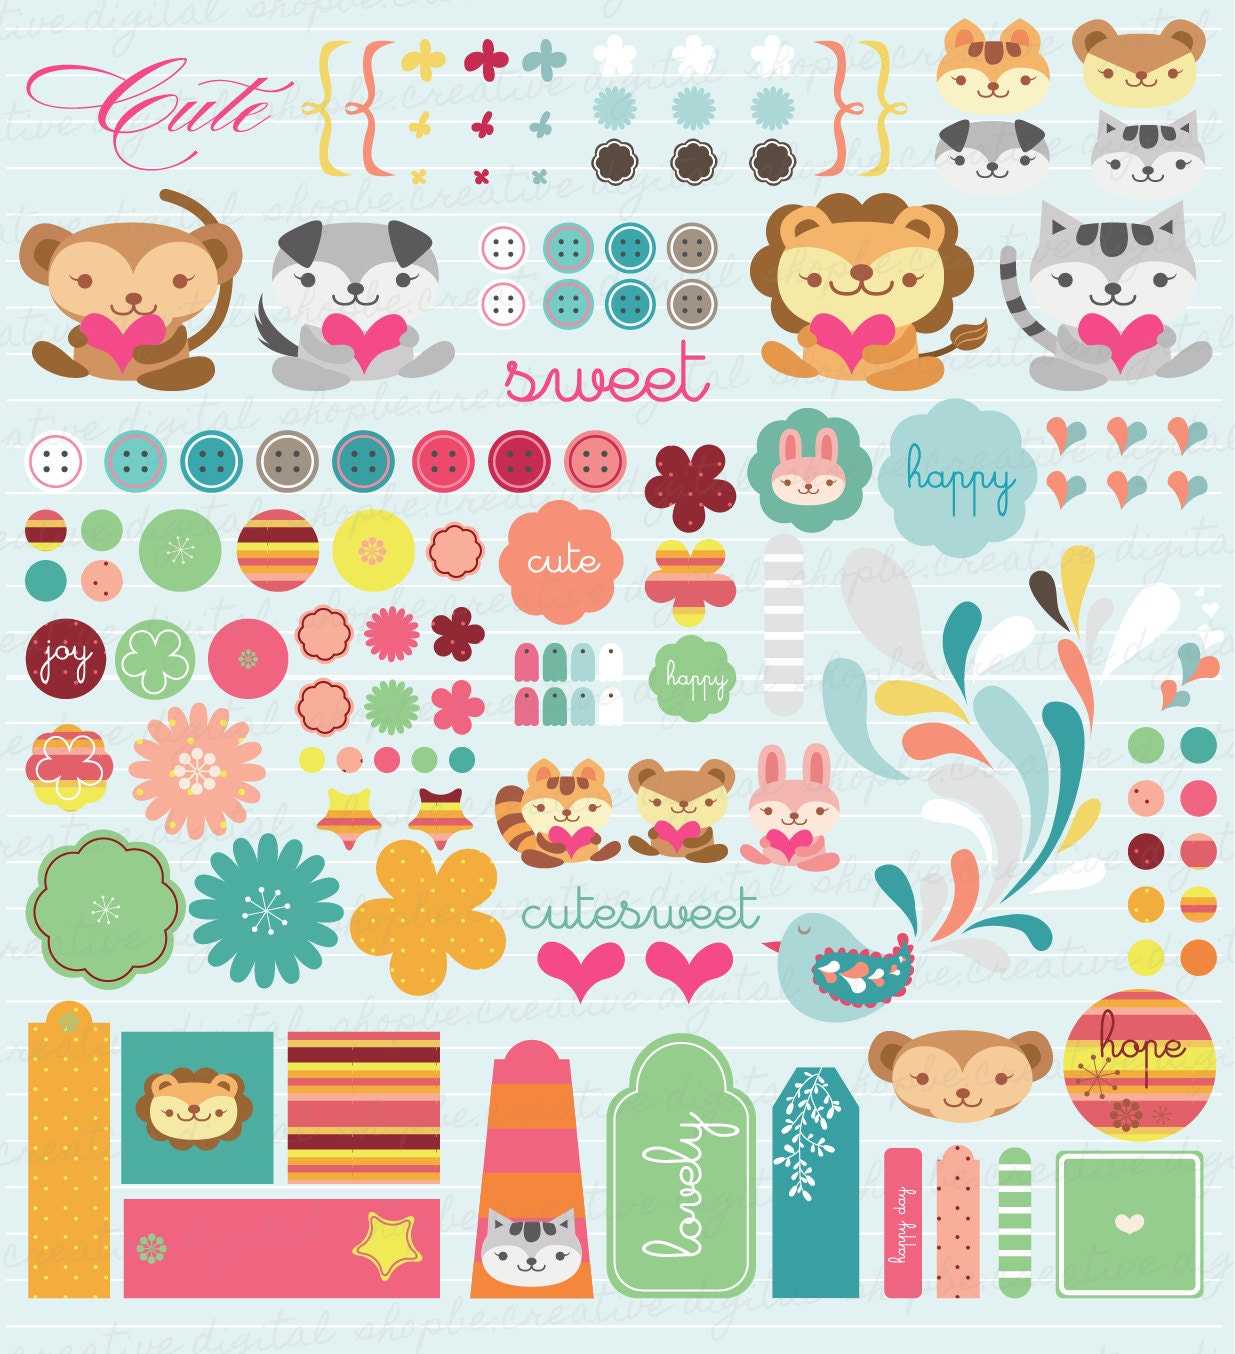 lovely-but-anyone-know-the-artist-scrapbook-printables-scrapbook